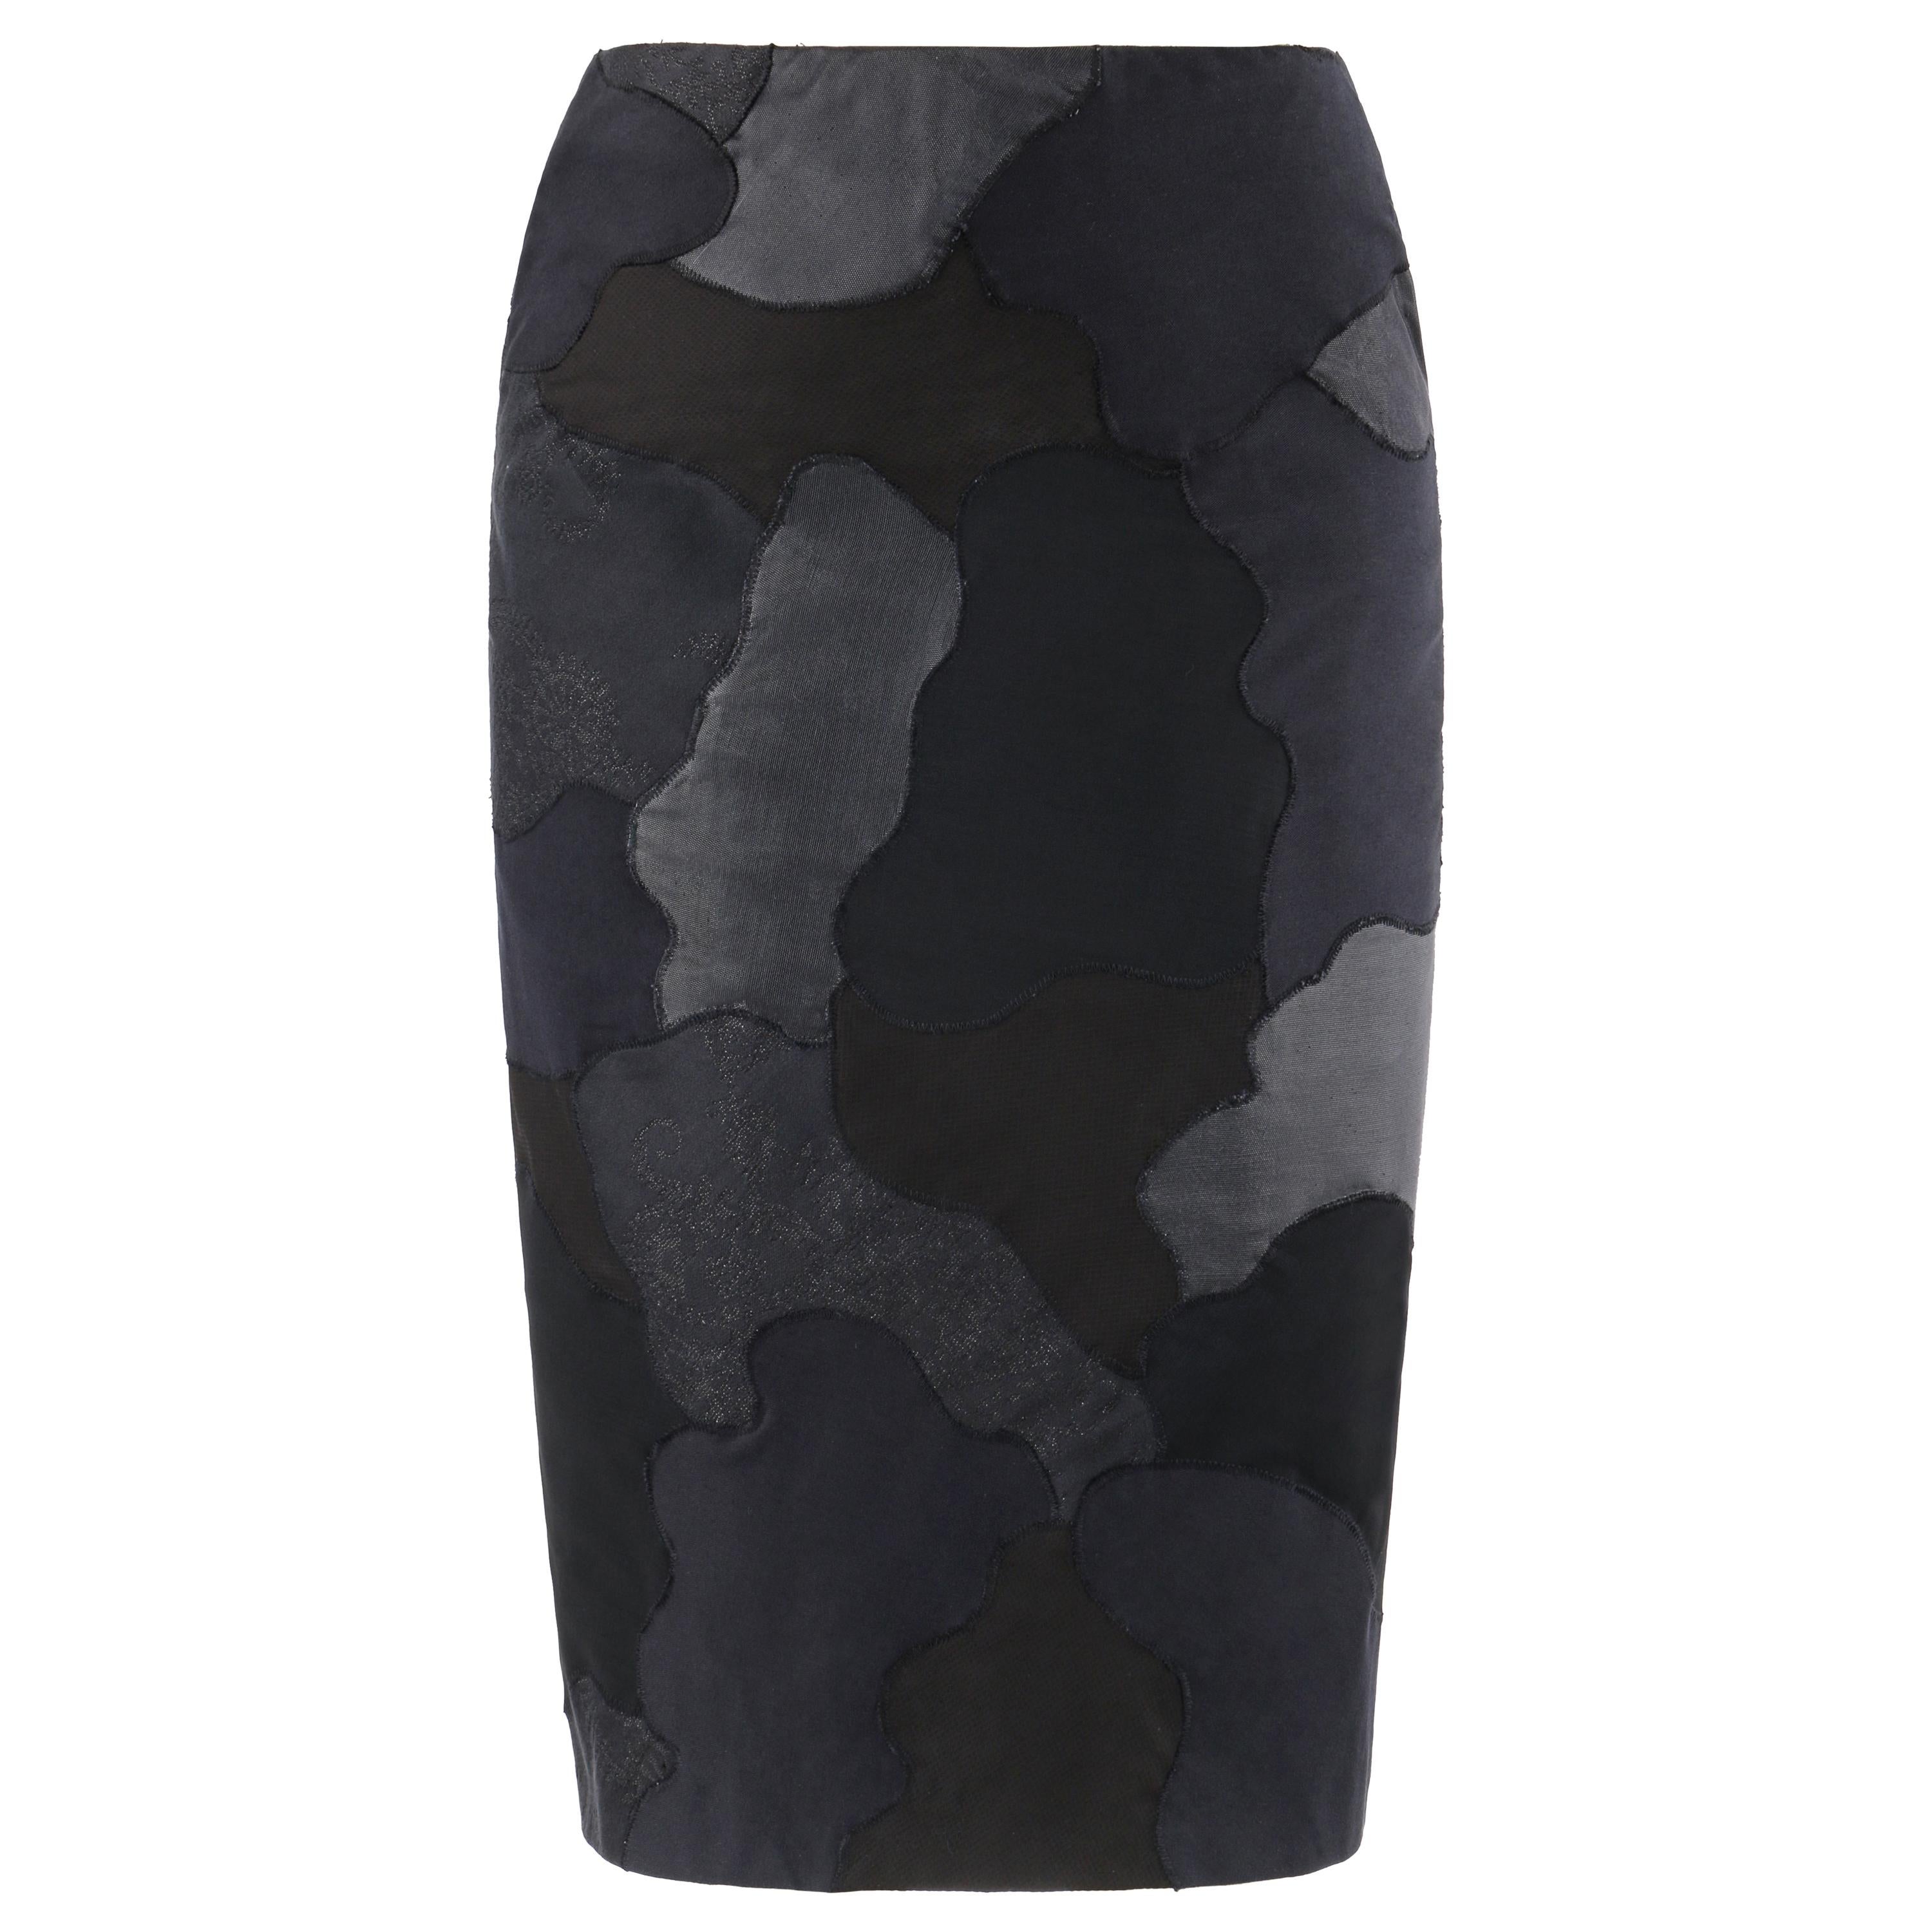 ALEXANDER McQUEEN S/S 2005 "It's Only A Game" Black Abstract Panel Pencil Skirt 